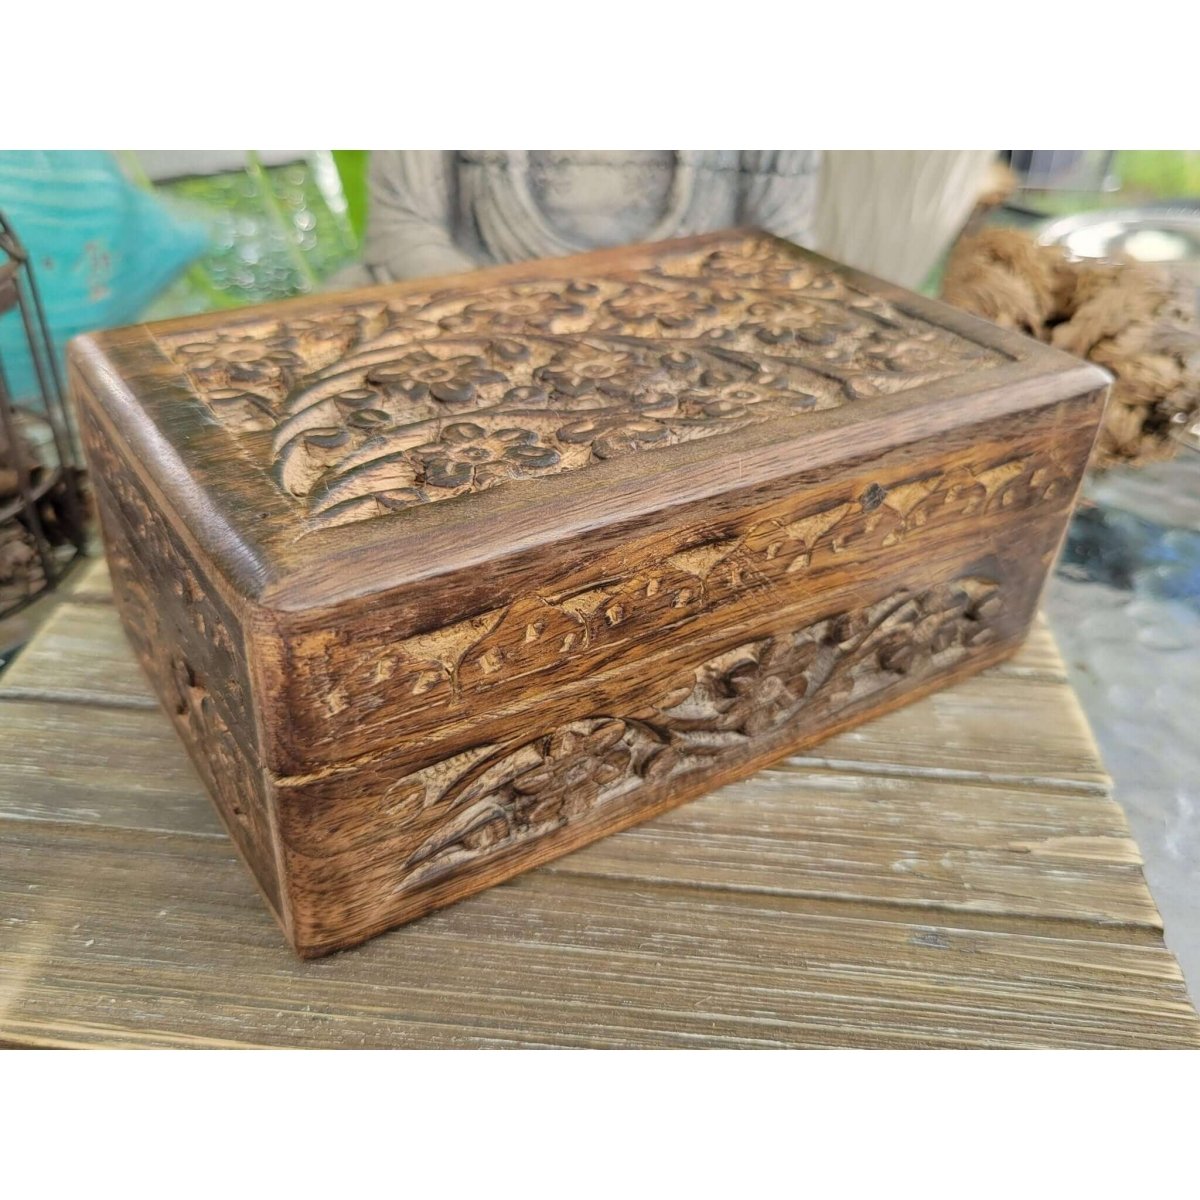 Mystery Witch Kit Vintage Jewelry Box Altar Kit Antique Wooden Box